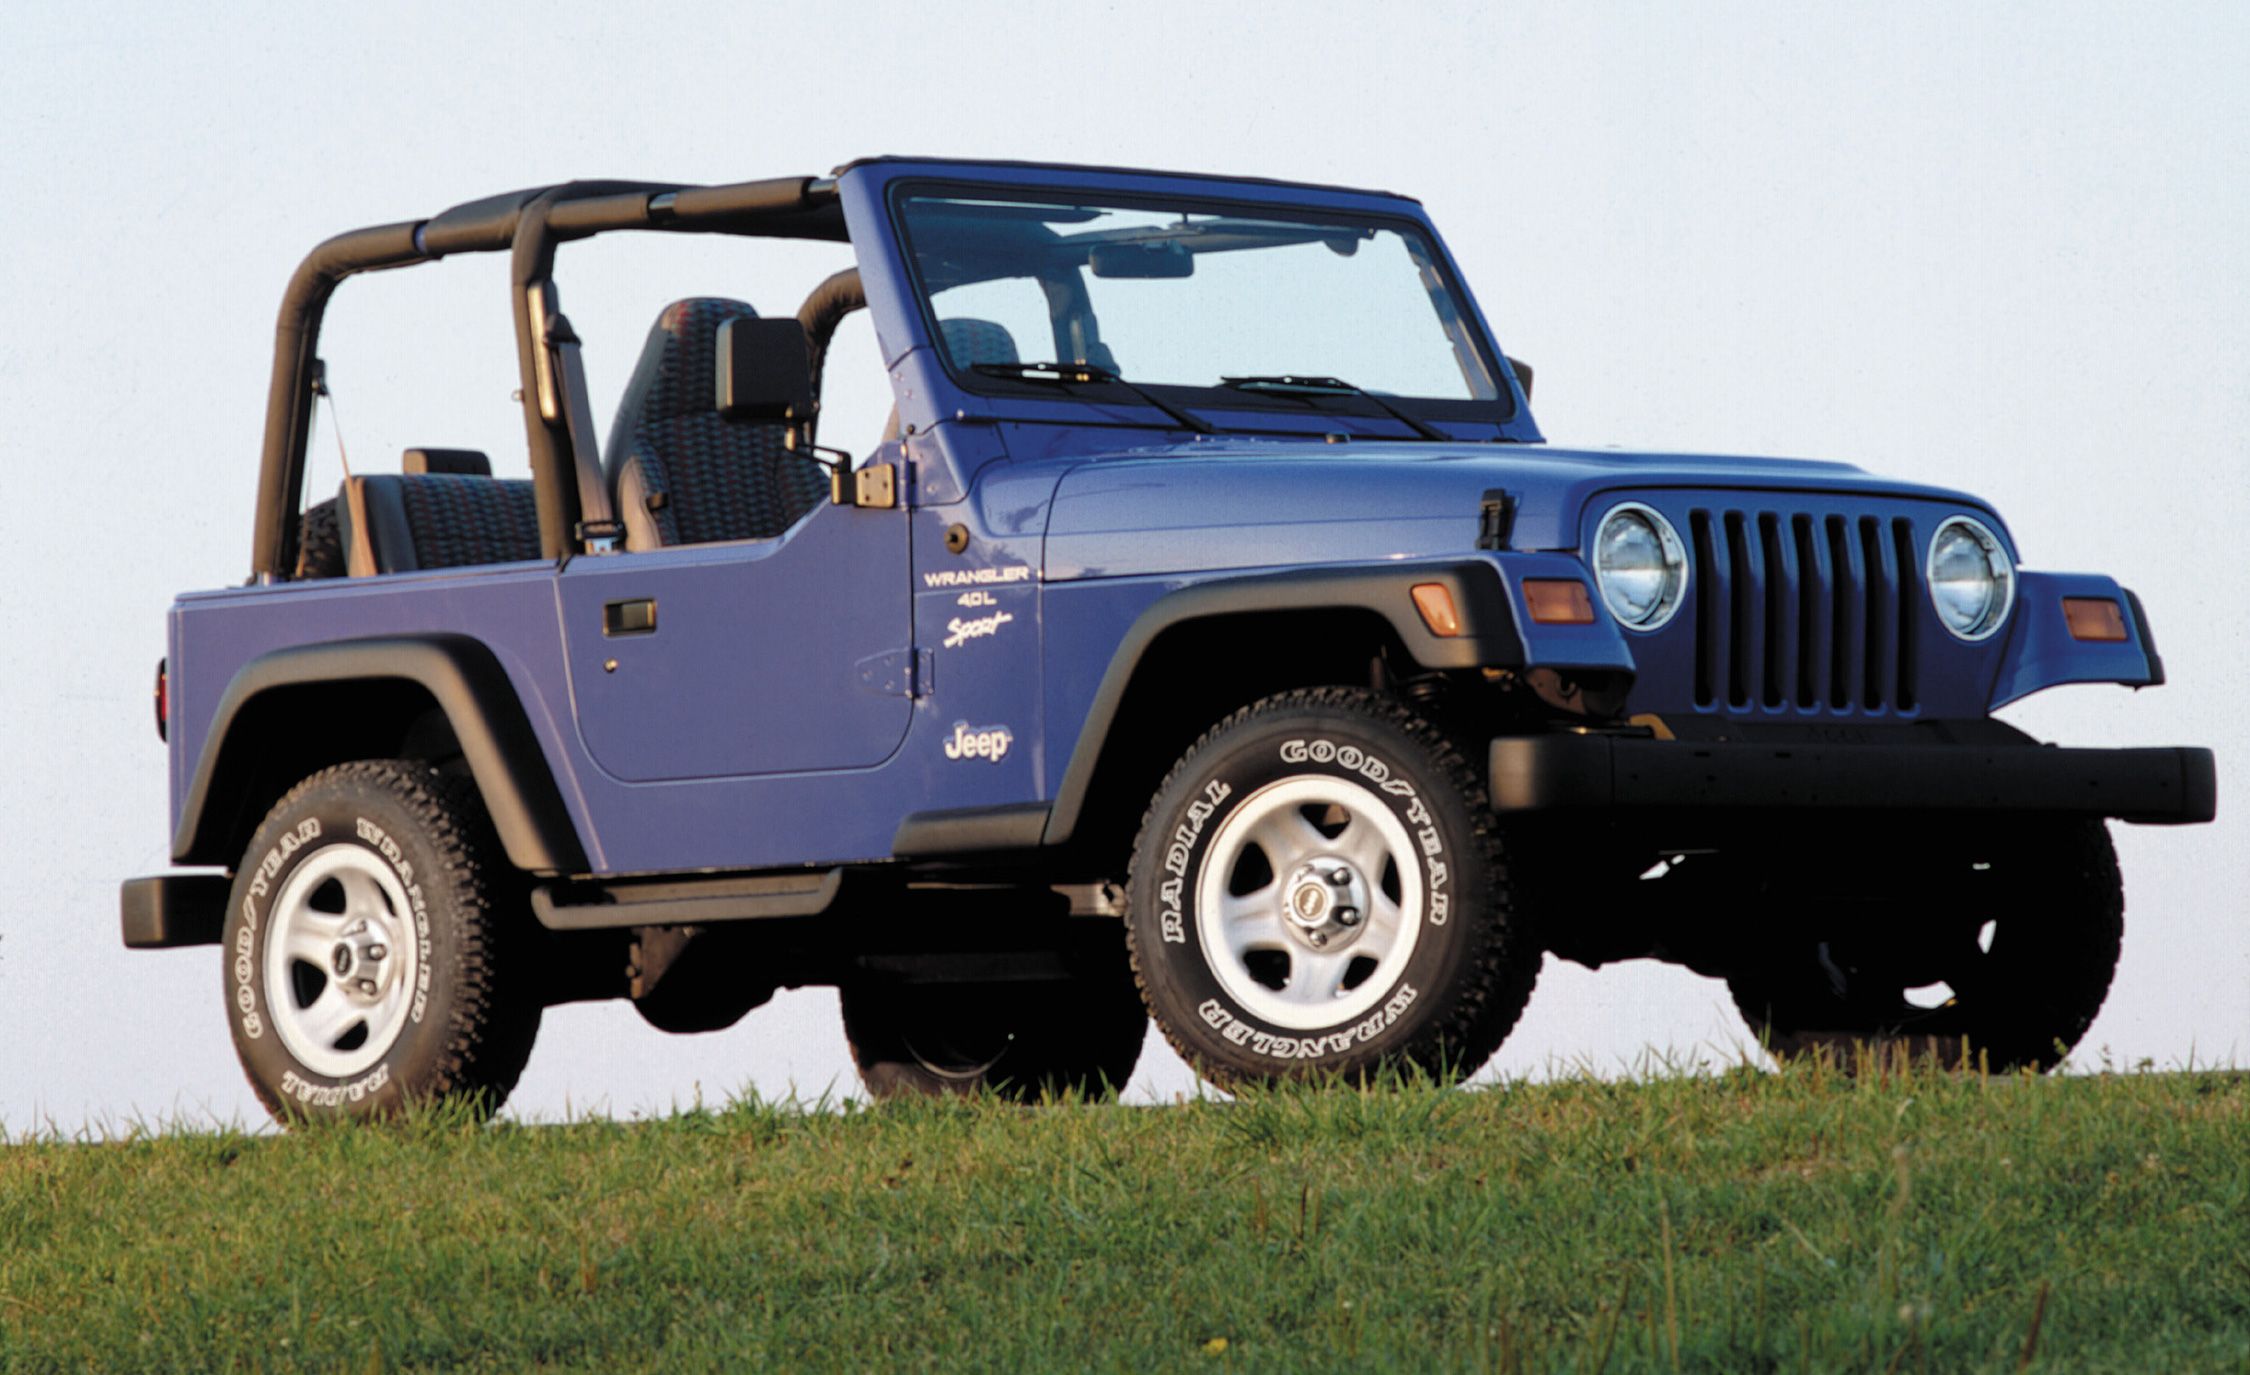 Visual History of the Jeep Wrangler, from 1986 to Present